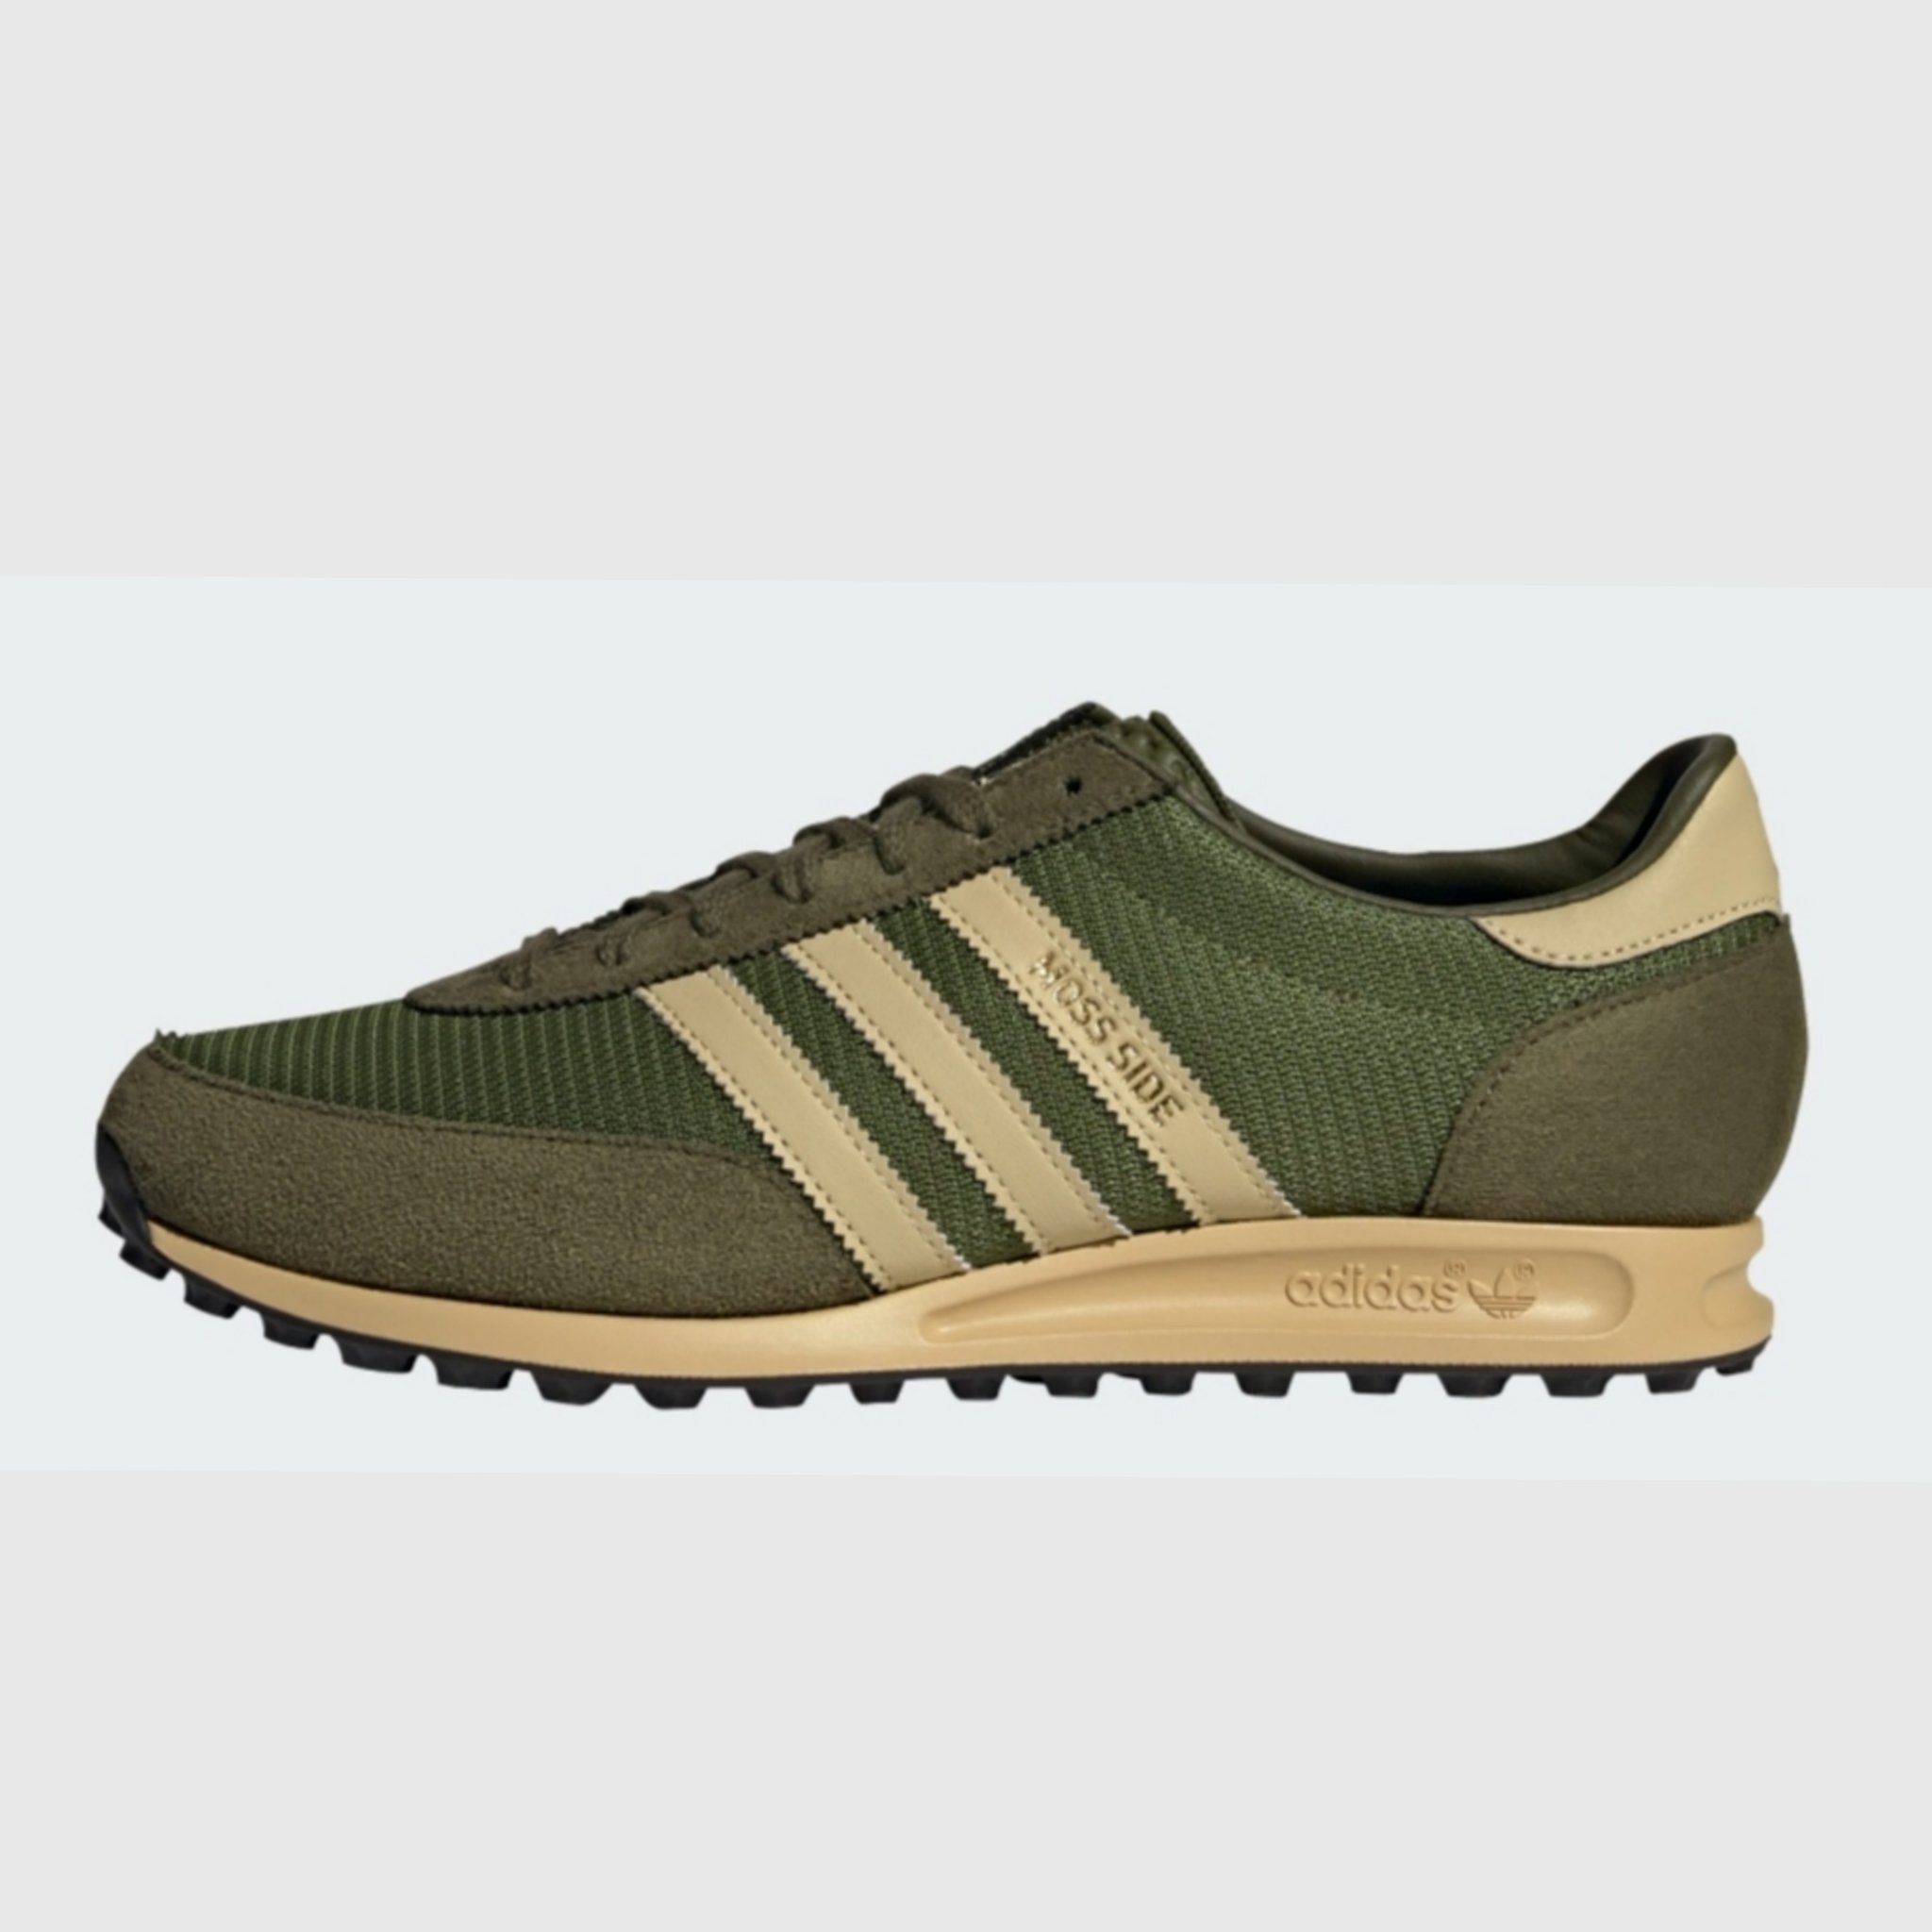 botón toca el piano menor adiFamily on Twitter: "Upcoming #adidas #MossSide They have appeared on the  @adidasUK website &amp; app Says sold out but that is a tech error, should  say coming soon. So actual date they